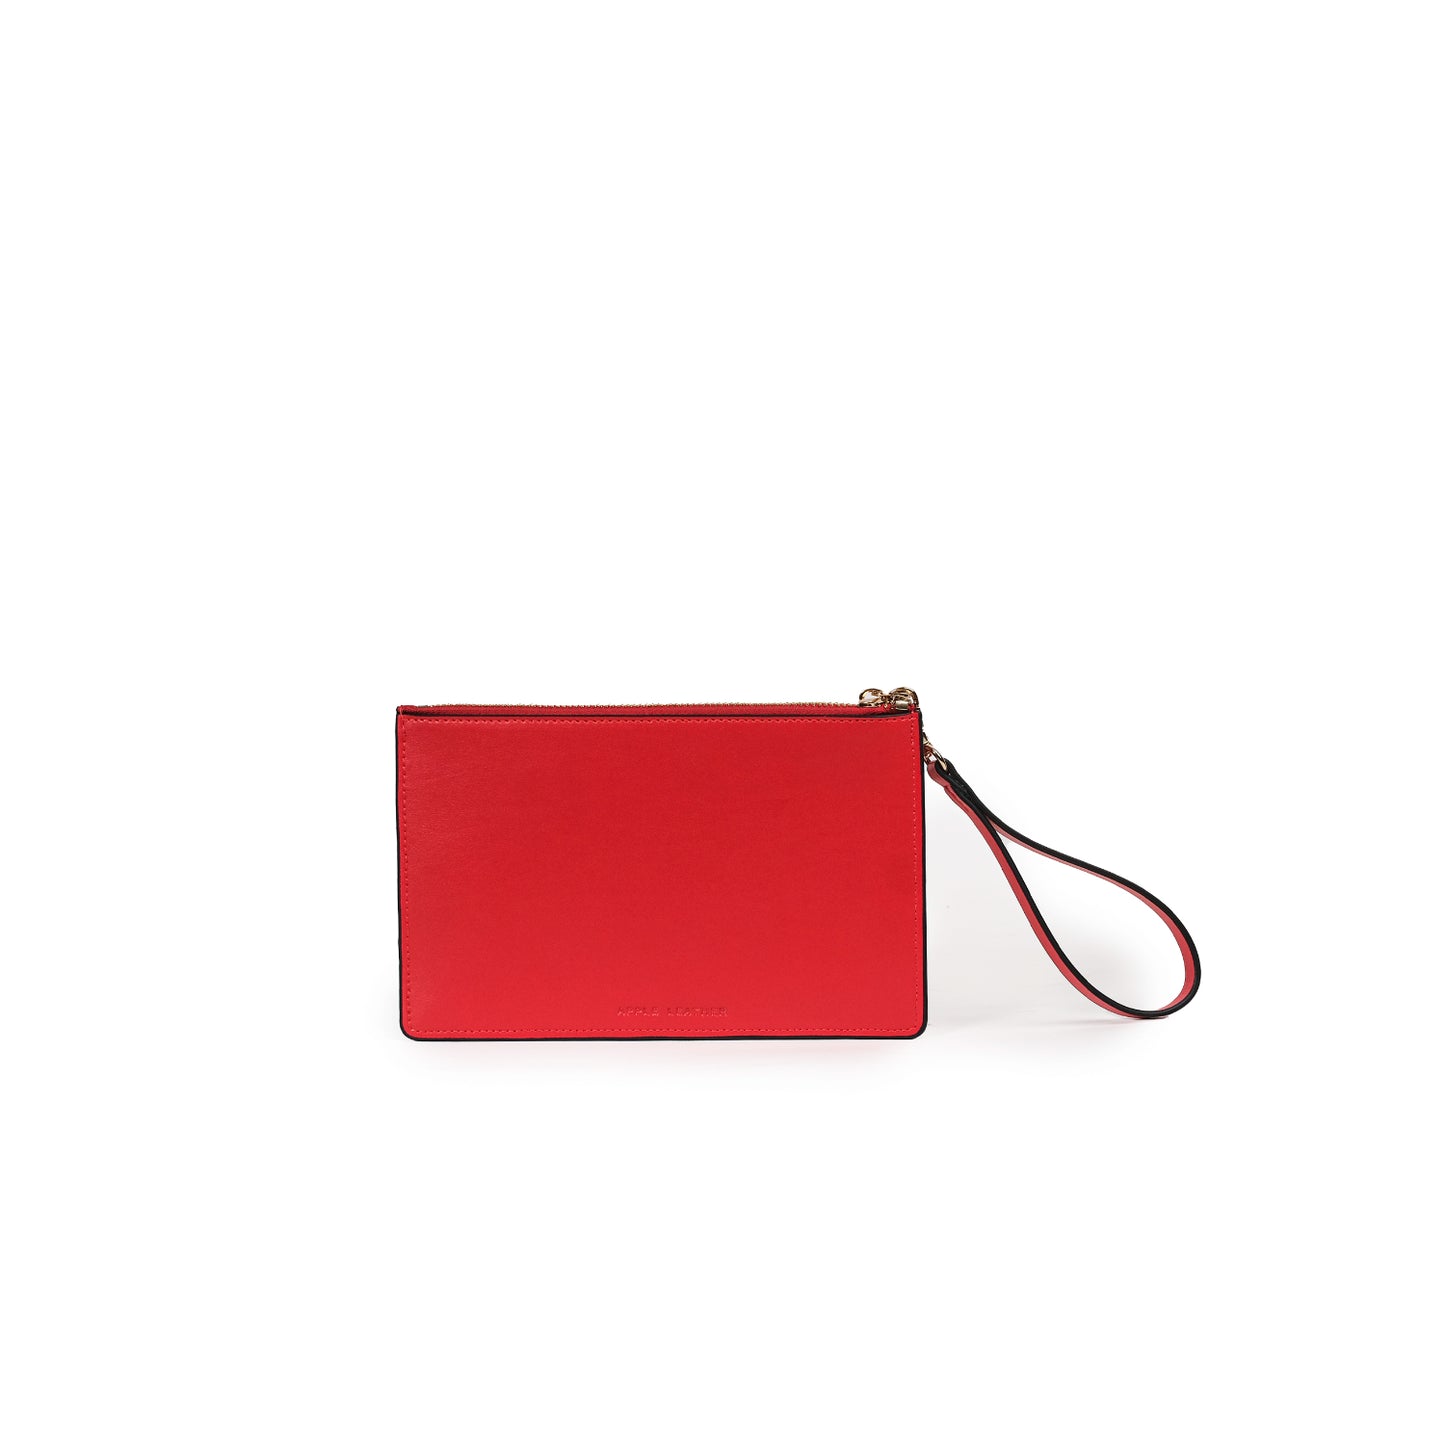 Vegan Apple Leather Leather Zip Wallet Red